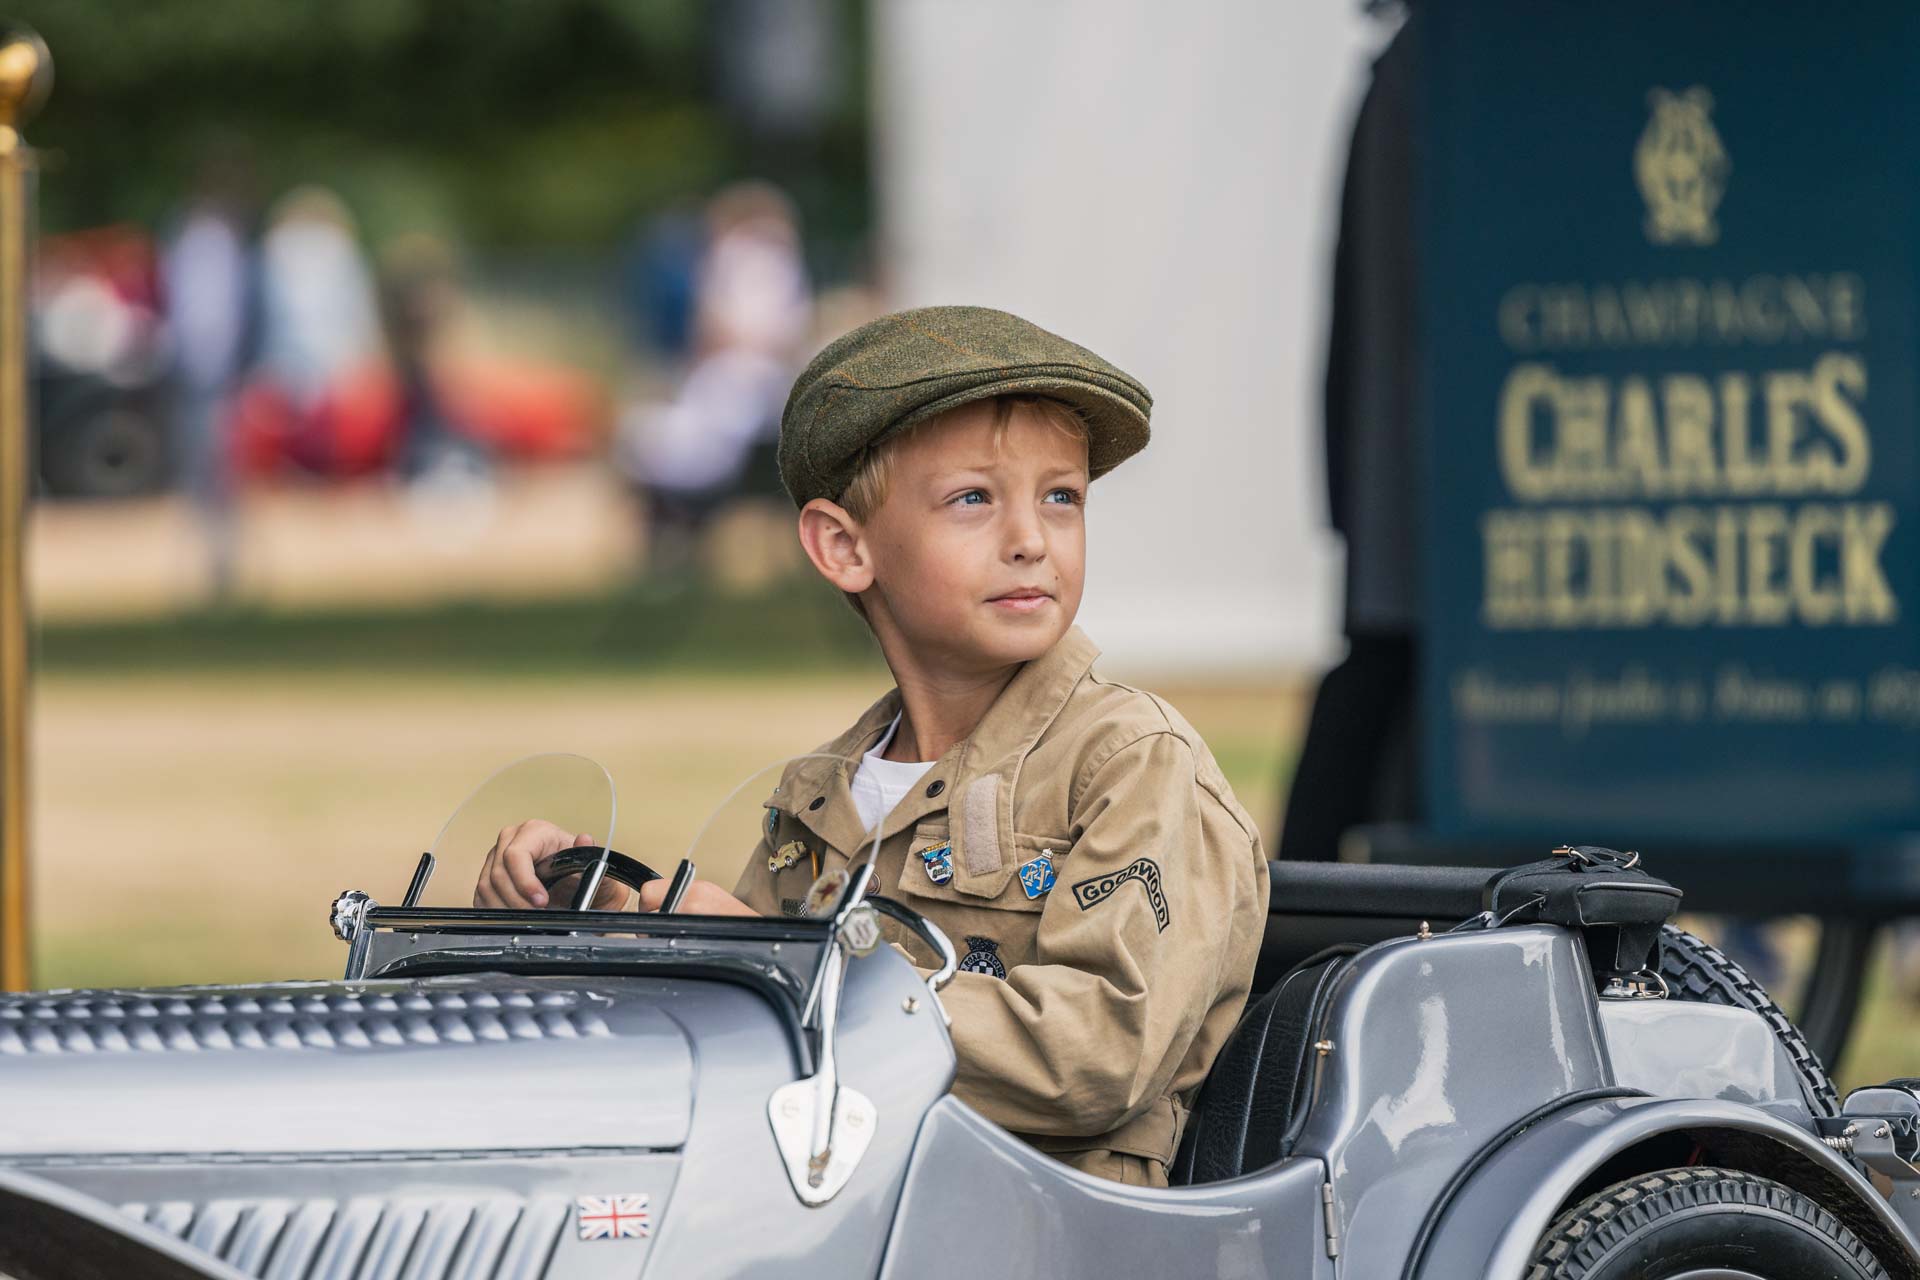 Junior Concours at Concours of Elegance